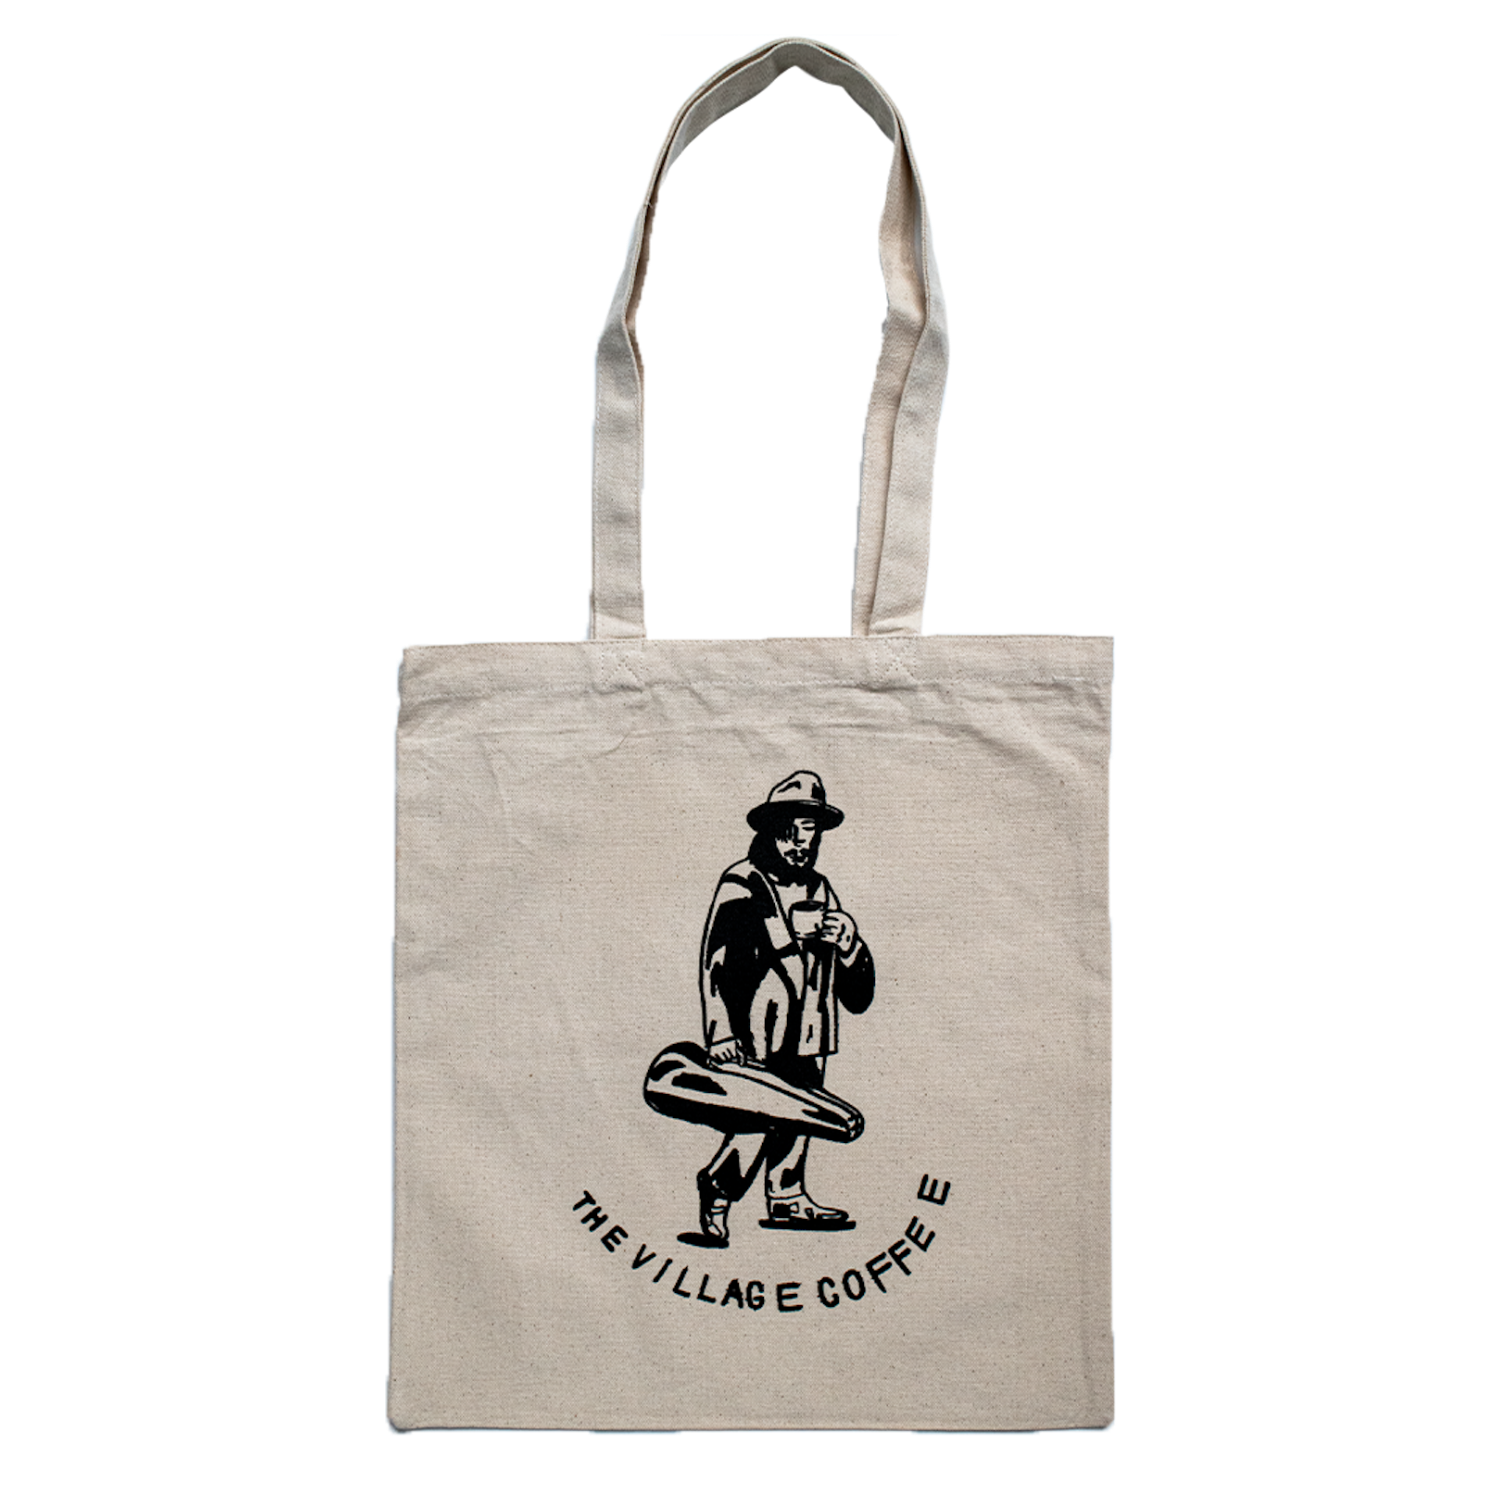 TVC Villager totebag – The Village Coffee & Music